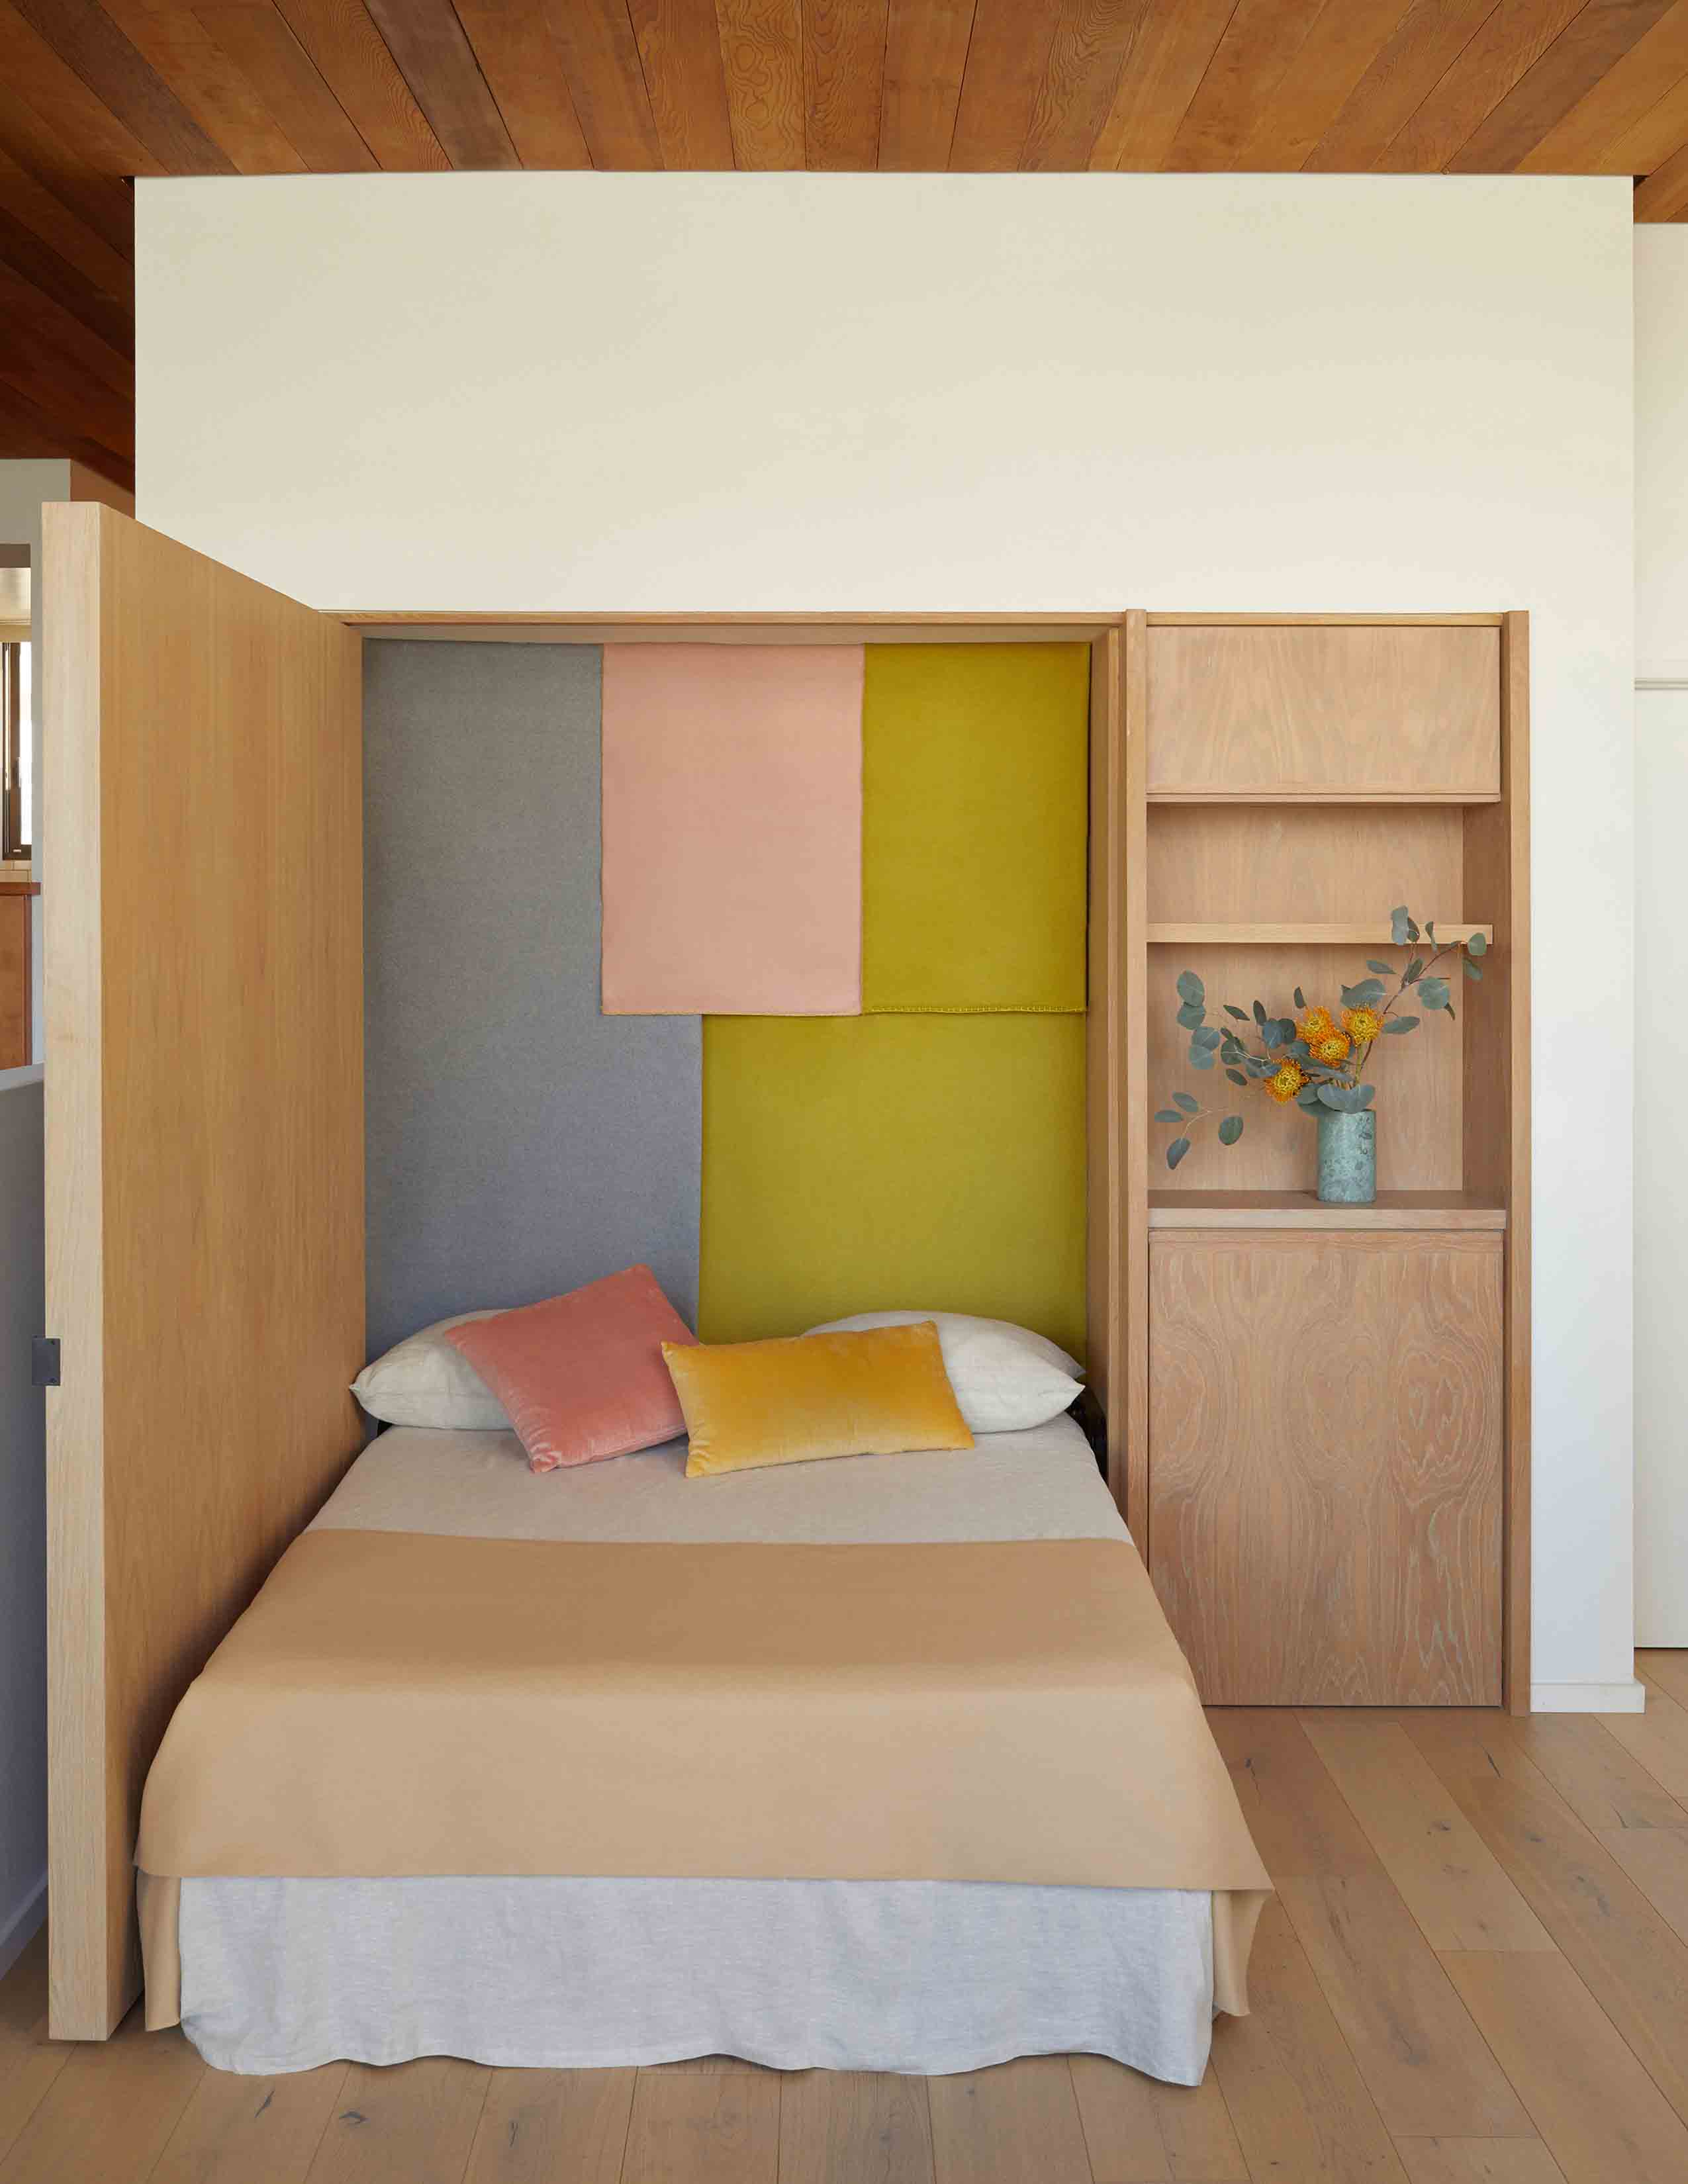 Fold-out-bed-pivot-door-design-by-Nabi-Boyd,-built-by-MANEUVERWORK,-photographed-by-Cody-James-with-FritsJurgens-System-One-2.jpg